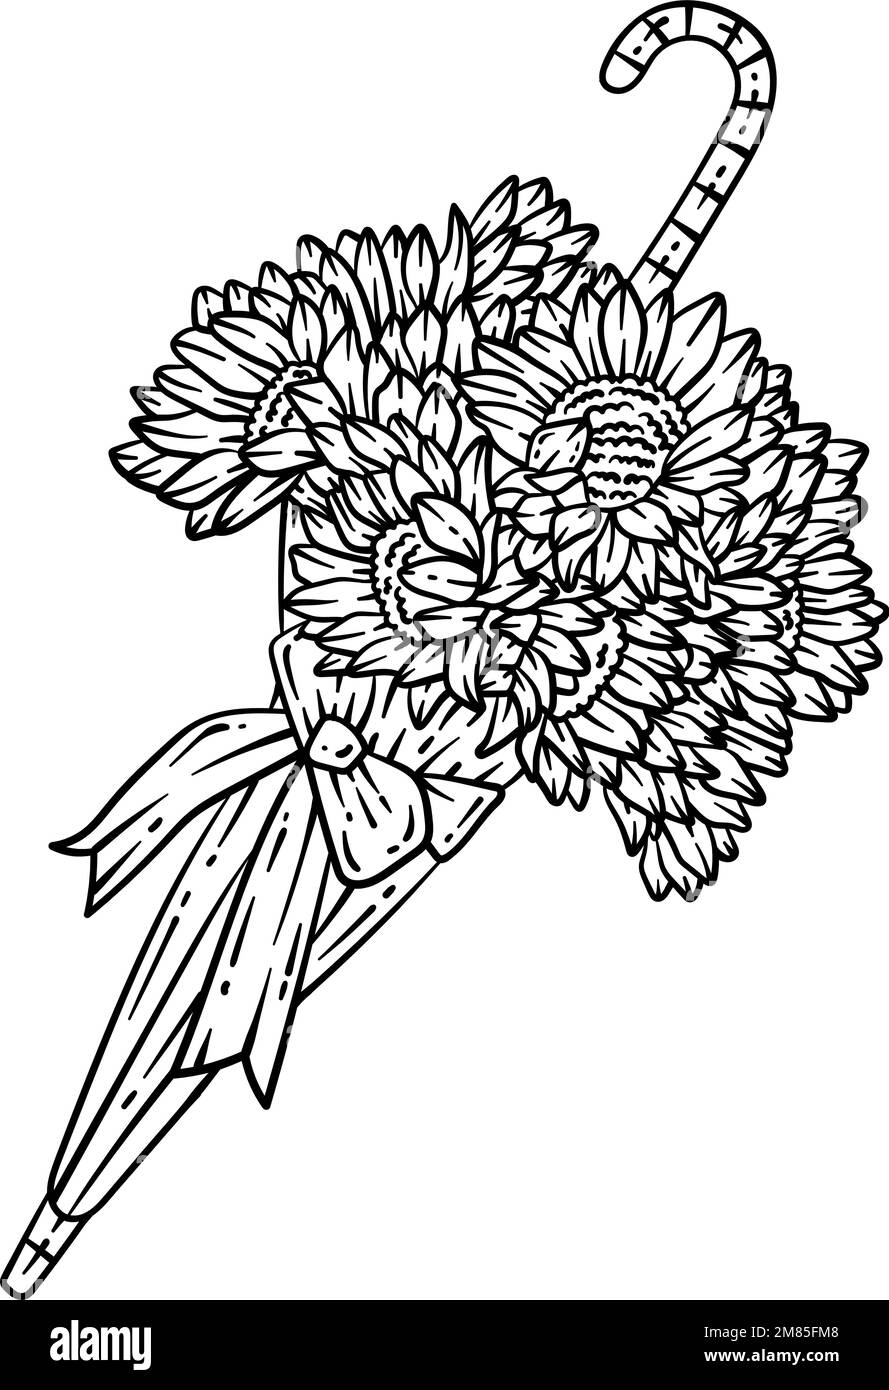 Umbrella Flowers Spring Coloring Page for Adults Stock Vector